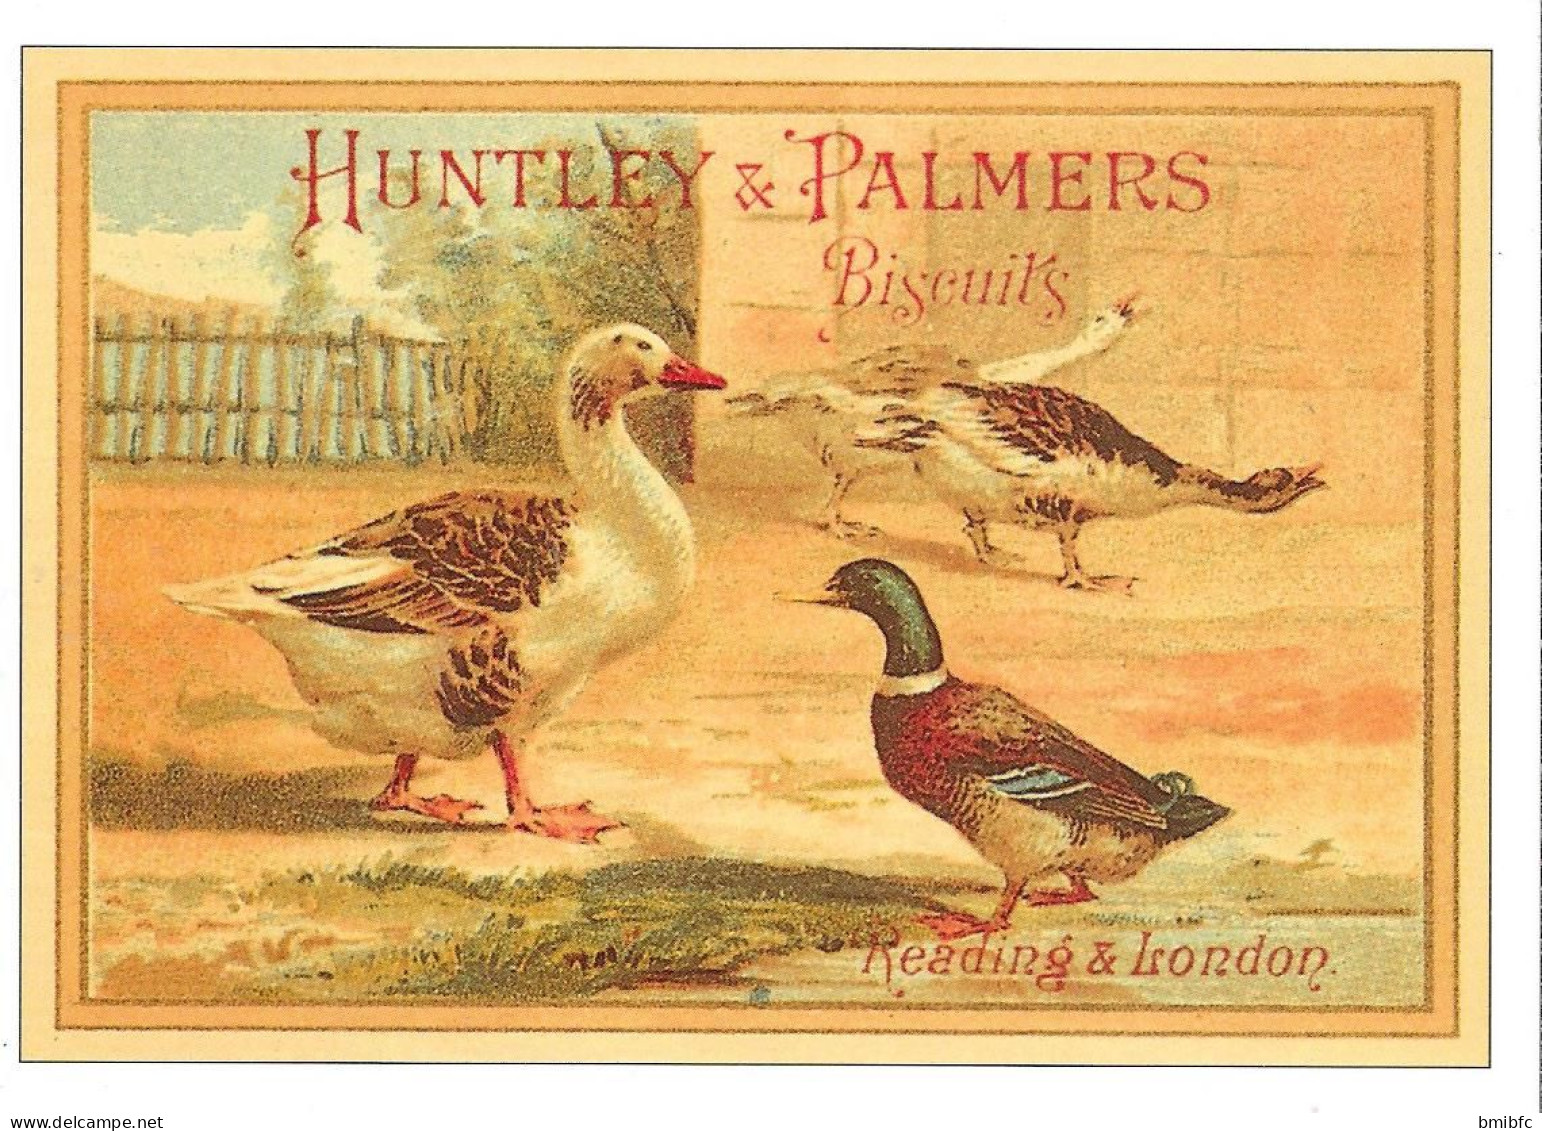 HUNTLEY & PALMERS - Biscuits - Reading & London - Advertising